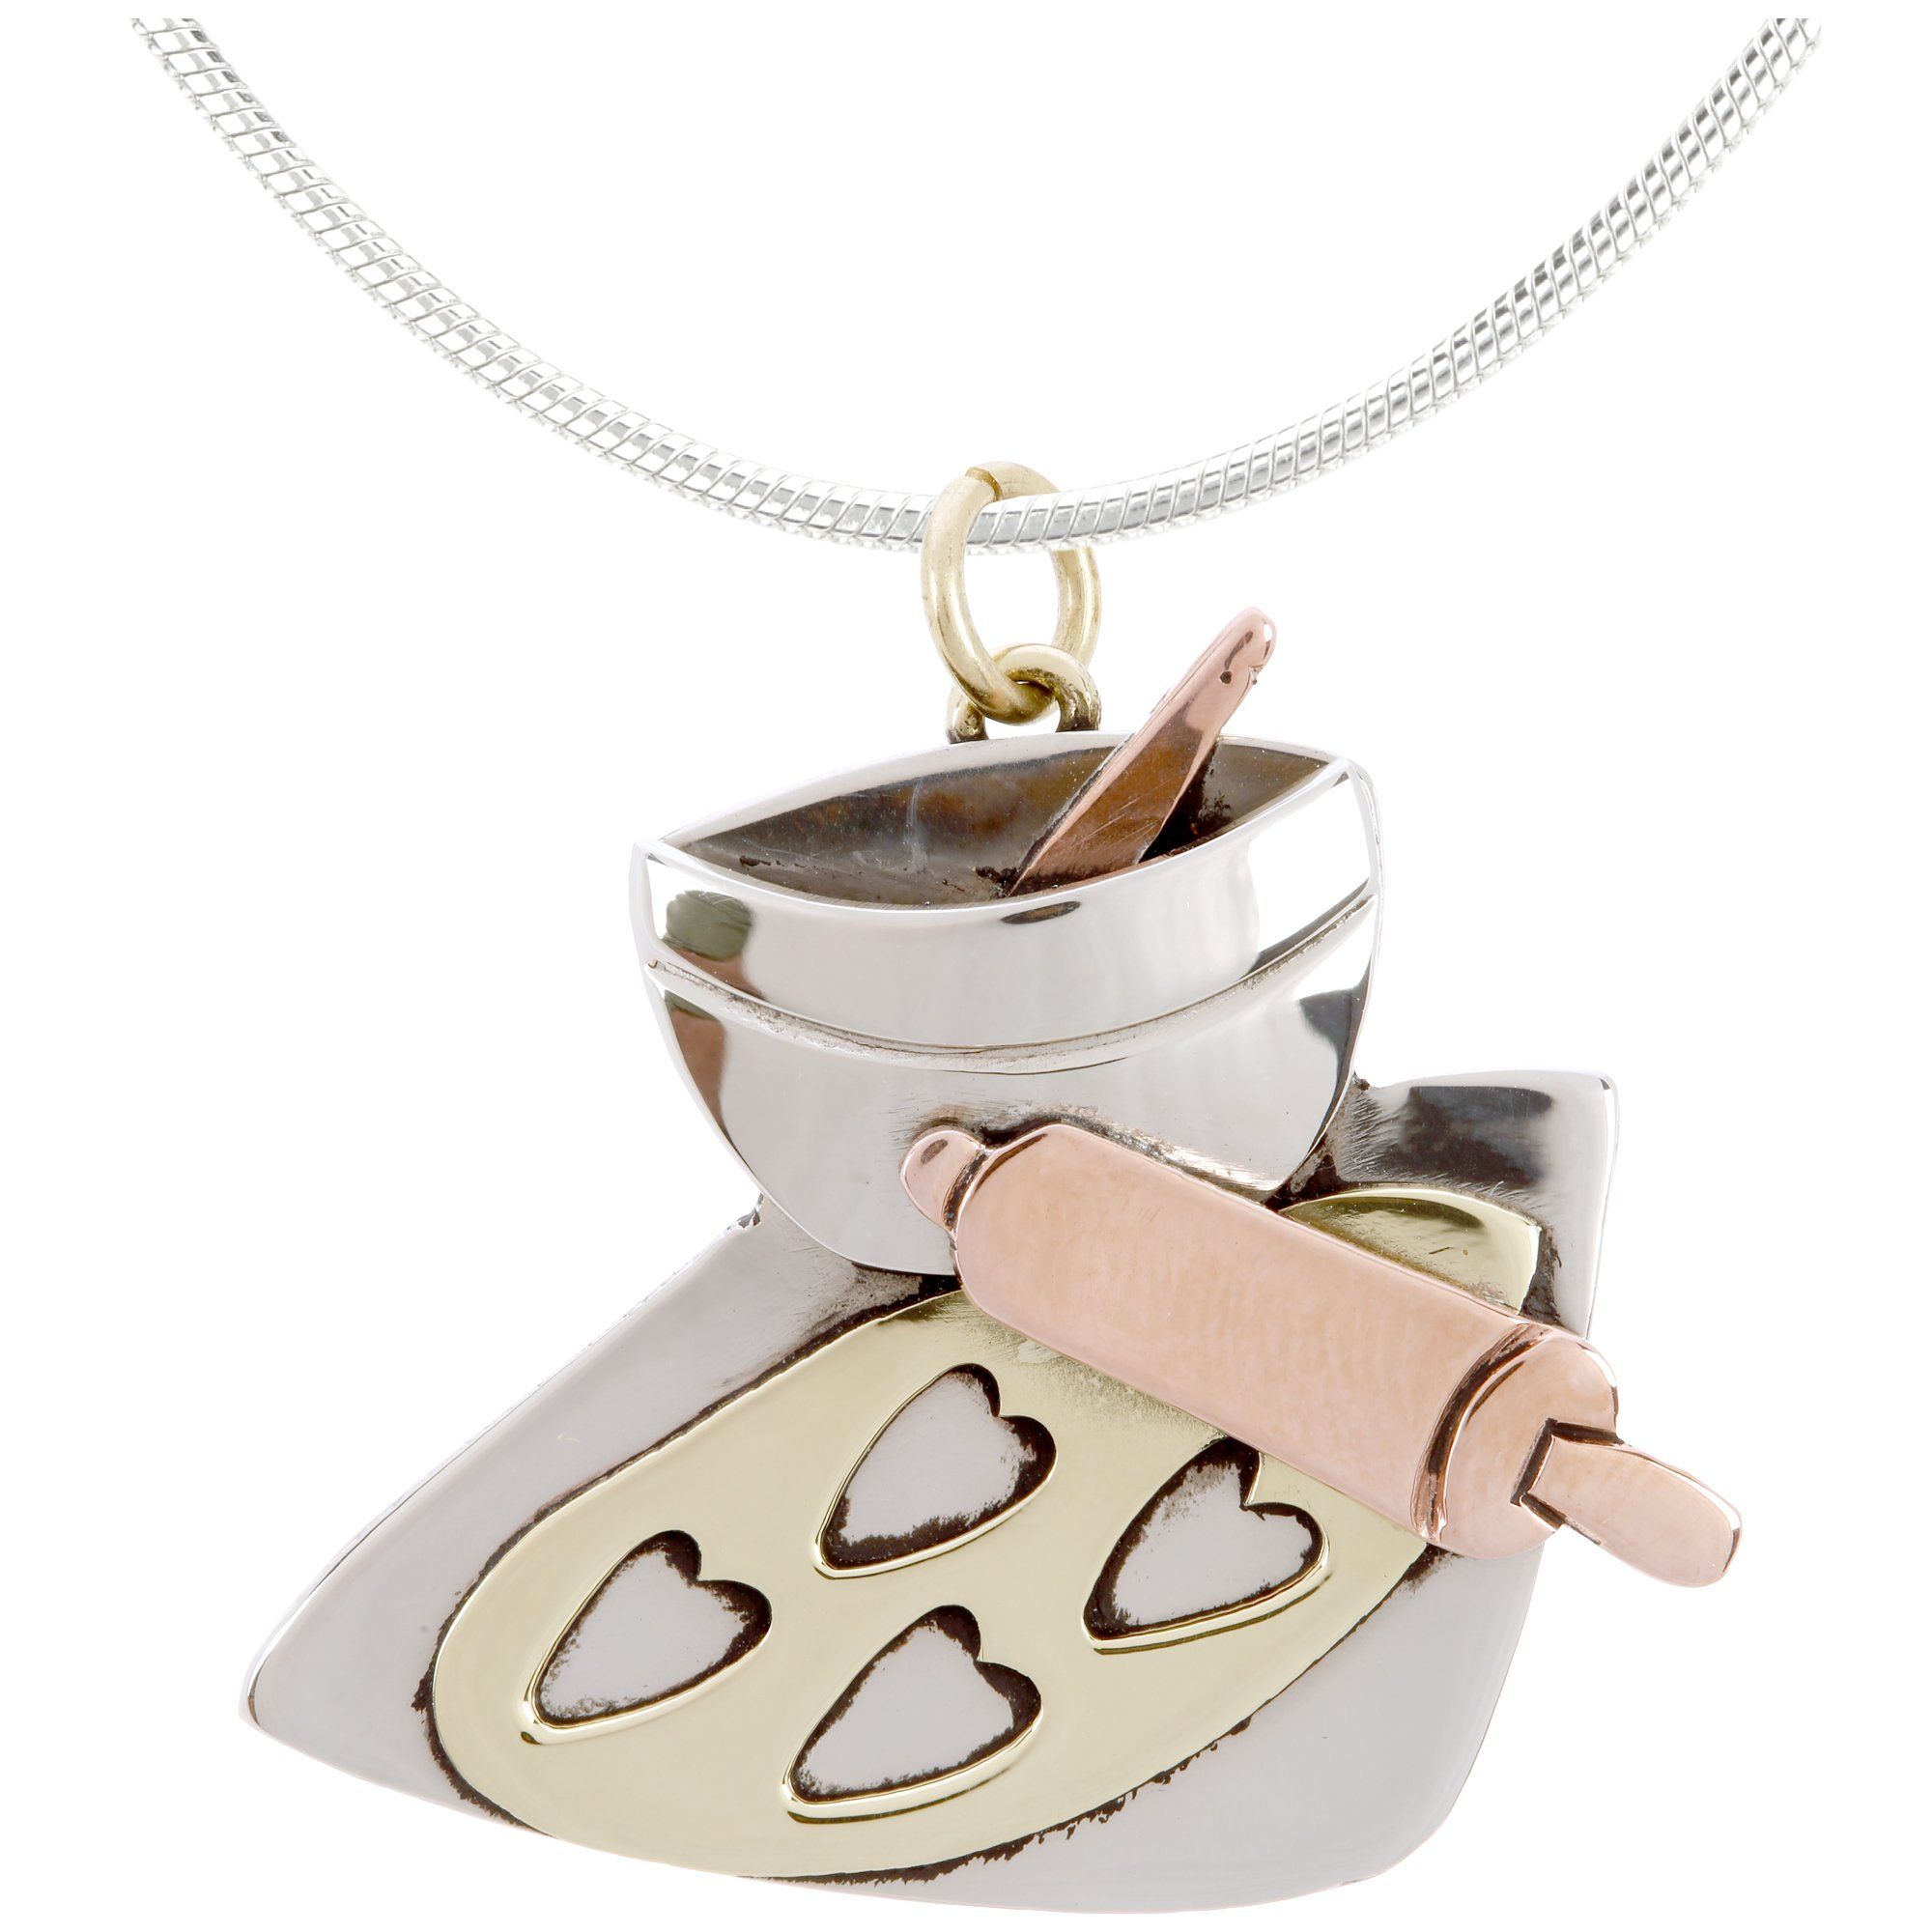 Baked With Love Necklace - With Silver Plated Chain